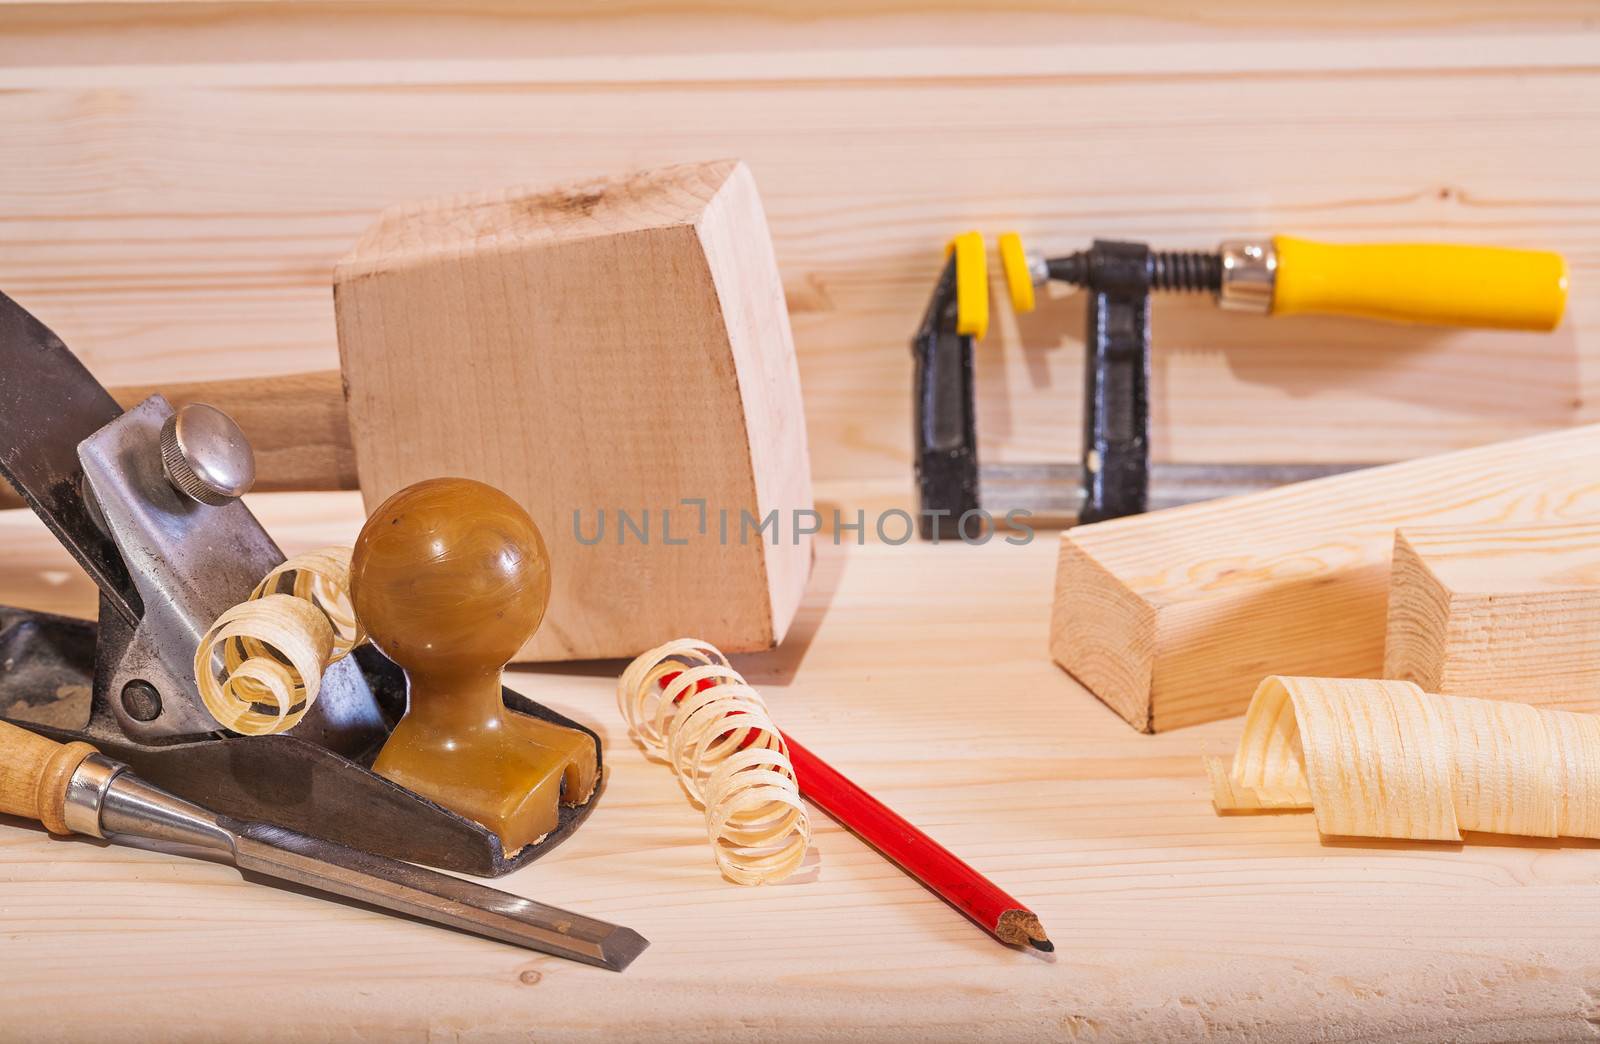 woodworking plane with other tools on wooden board